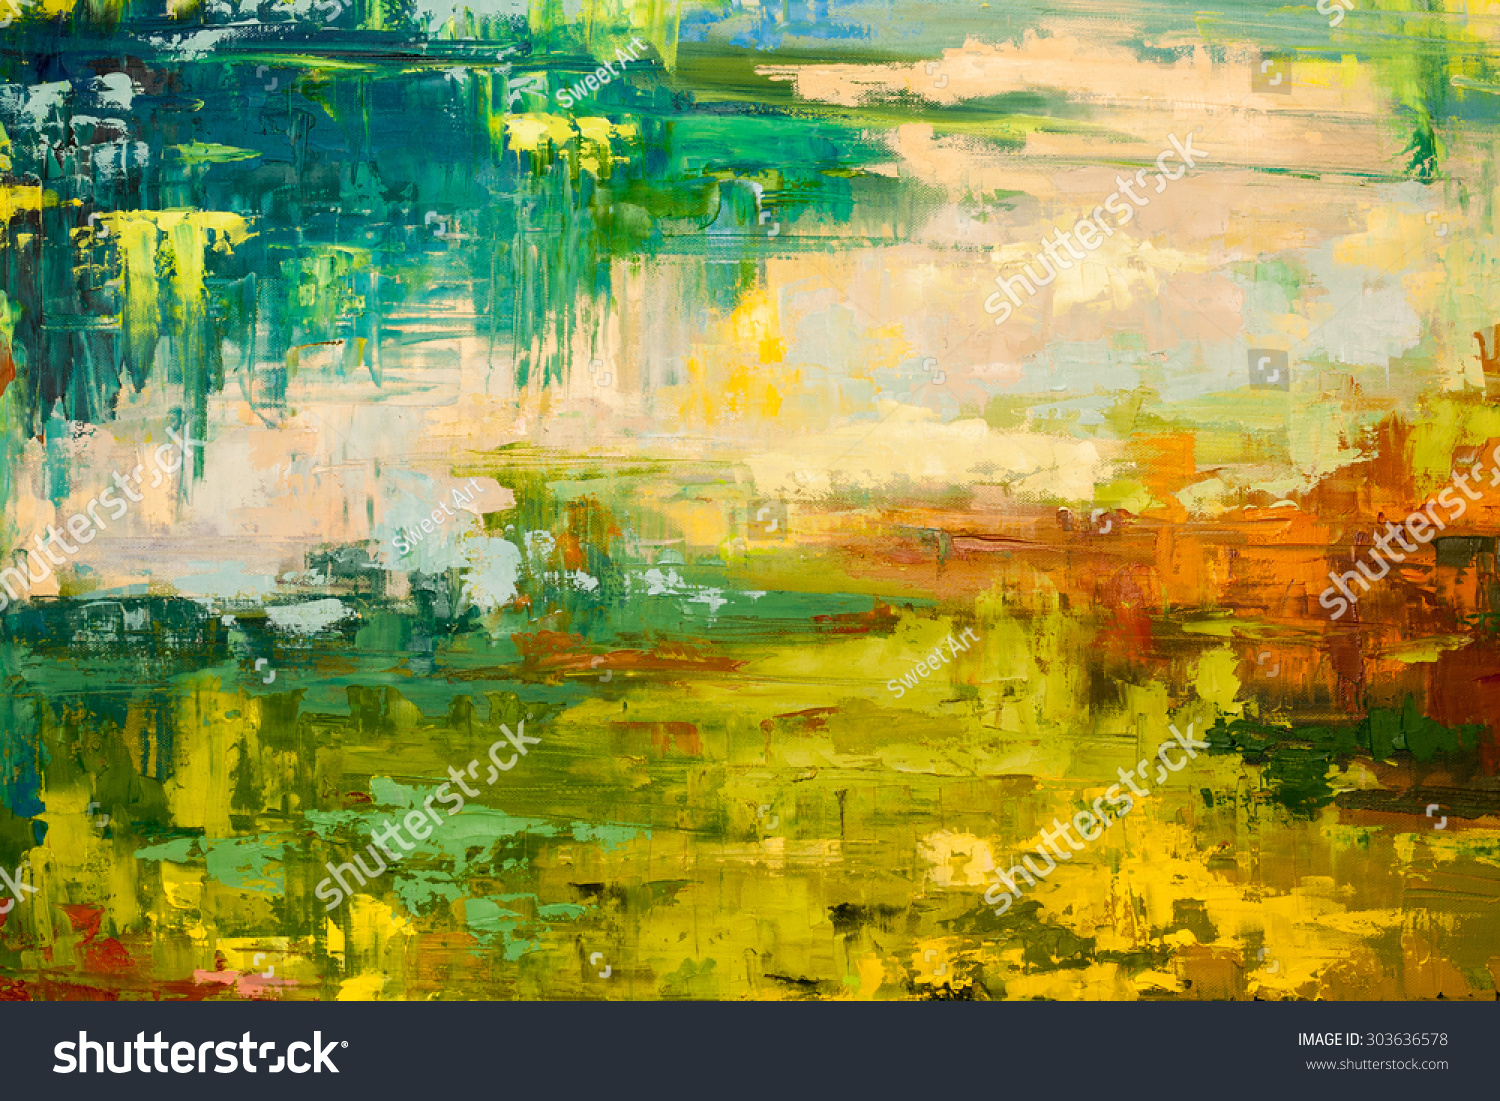 Abstract Art Background Oil Painting On Stock Illustration 303636578 ...